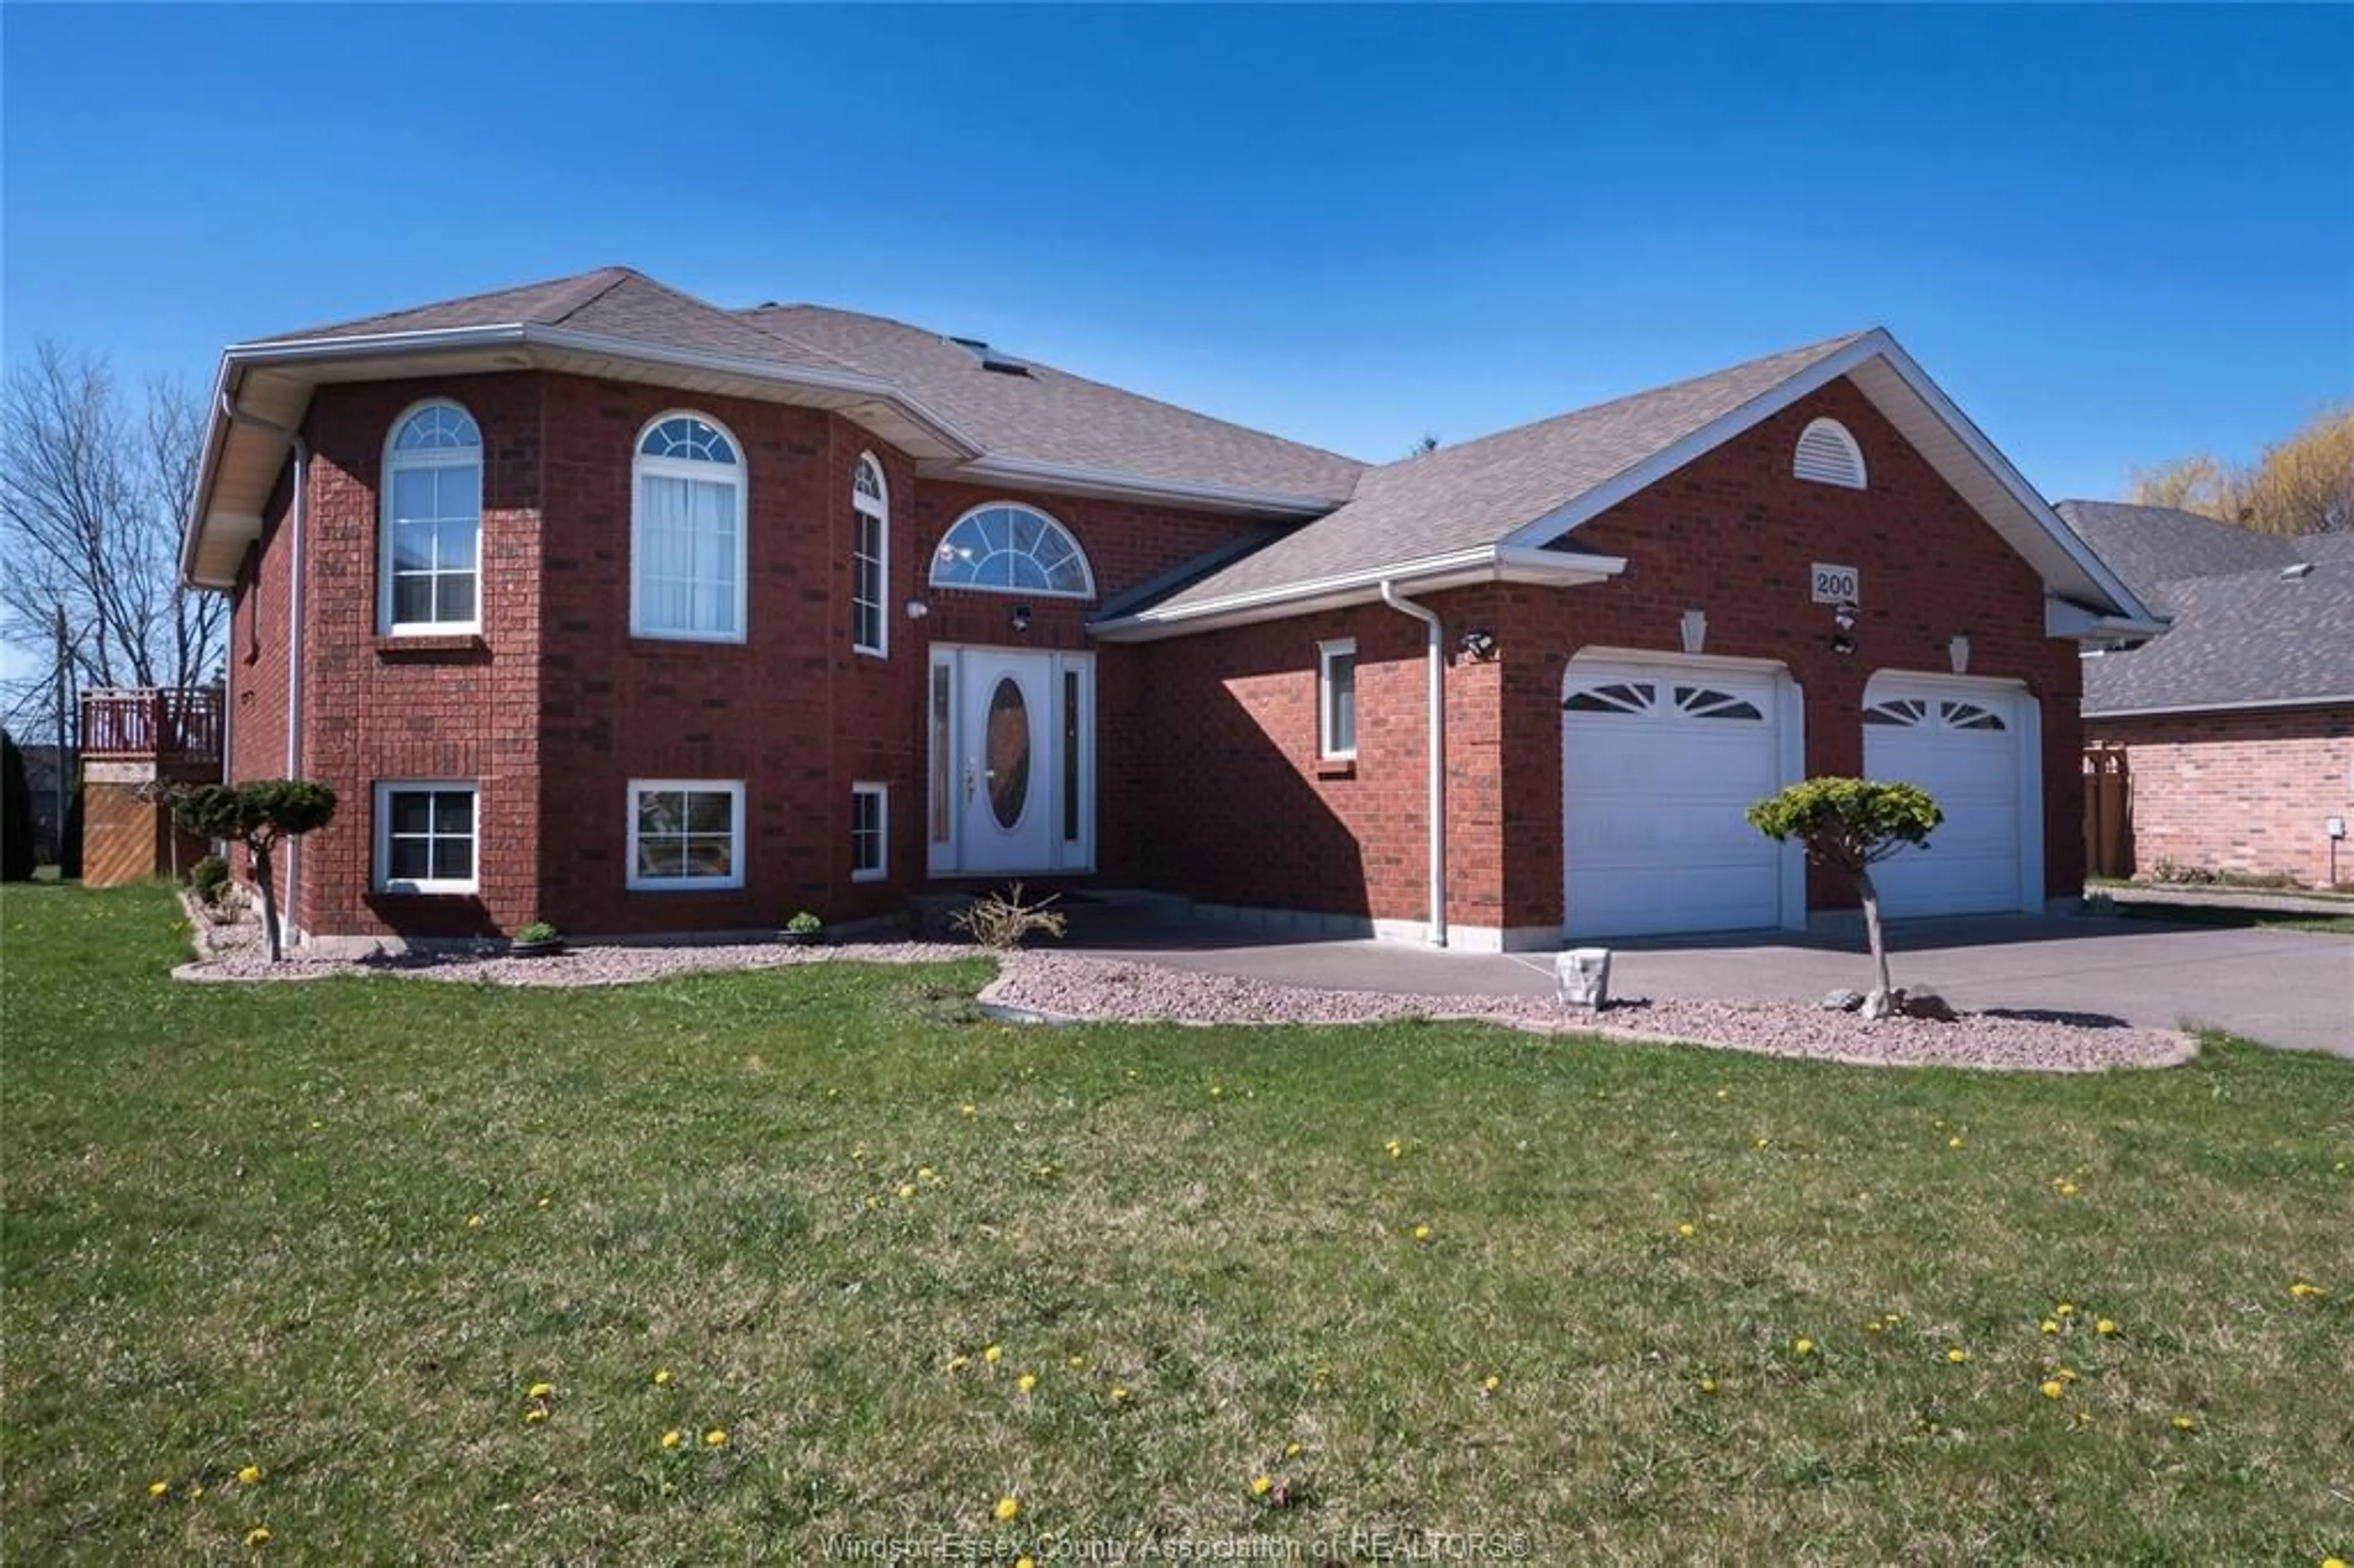 Home with brick exterior material for 200 GIGNAC Cres, LaSalle Ontario N9J 3S4